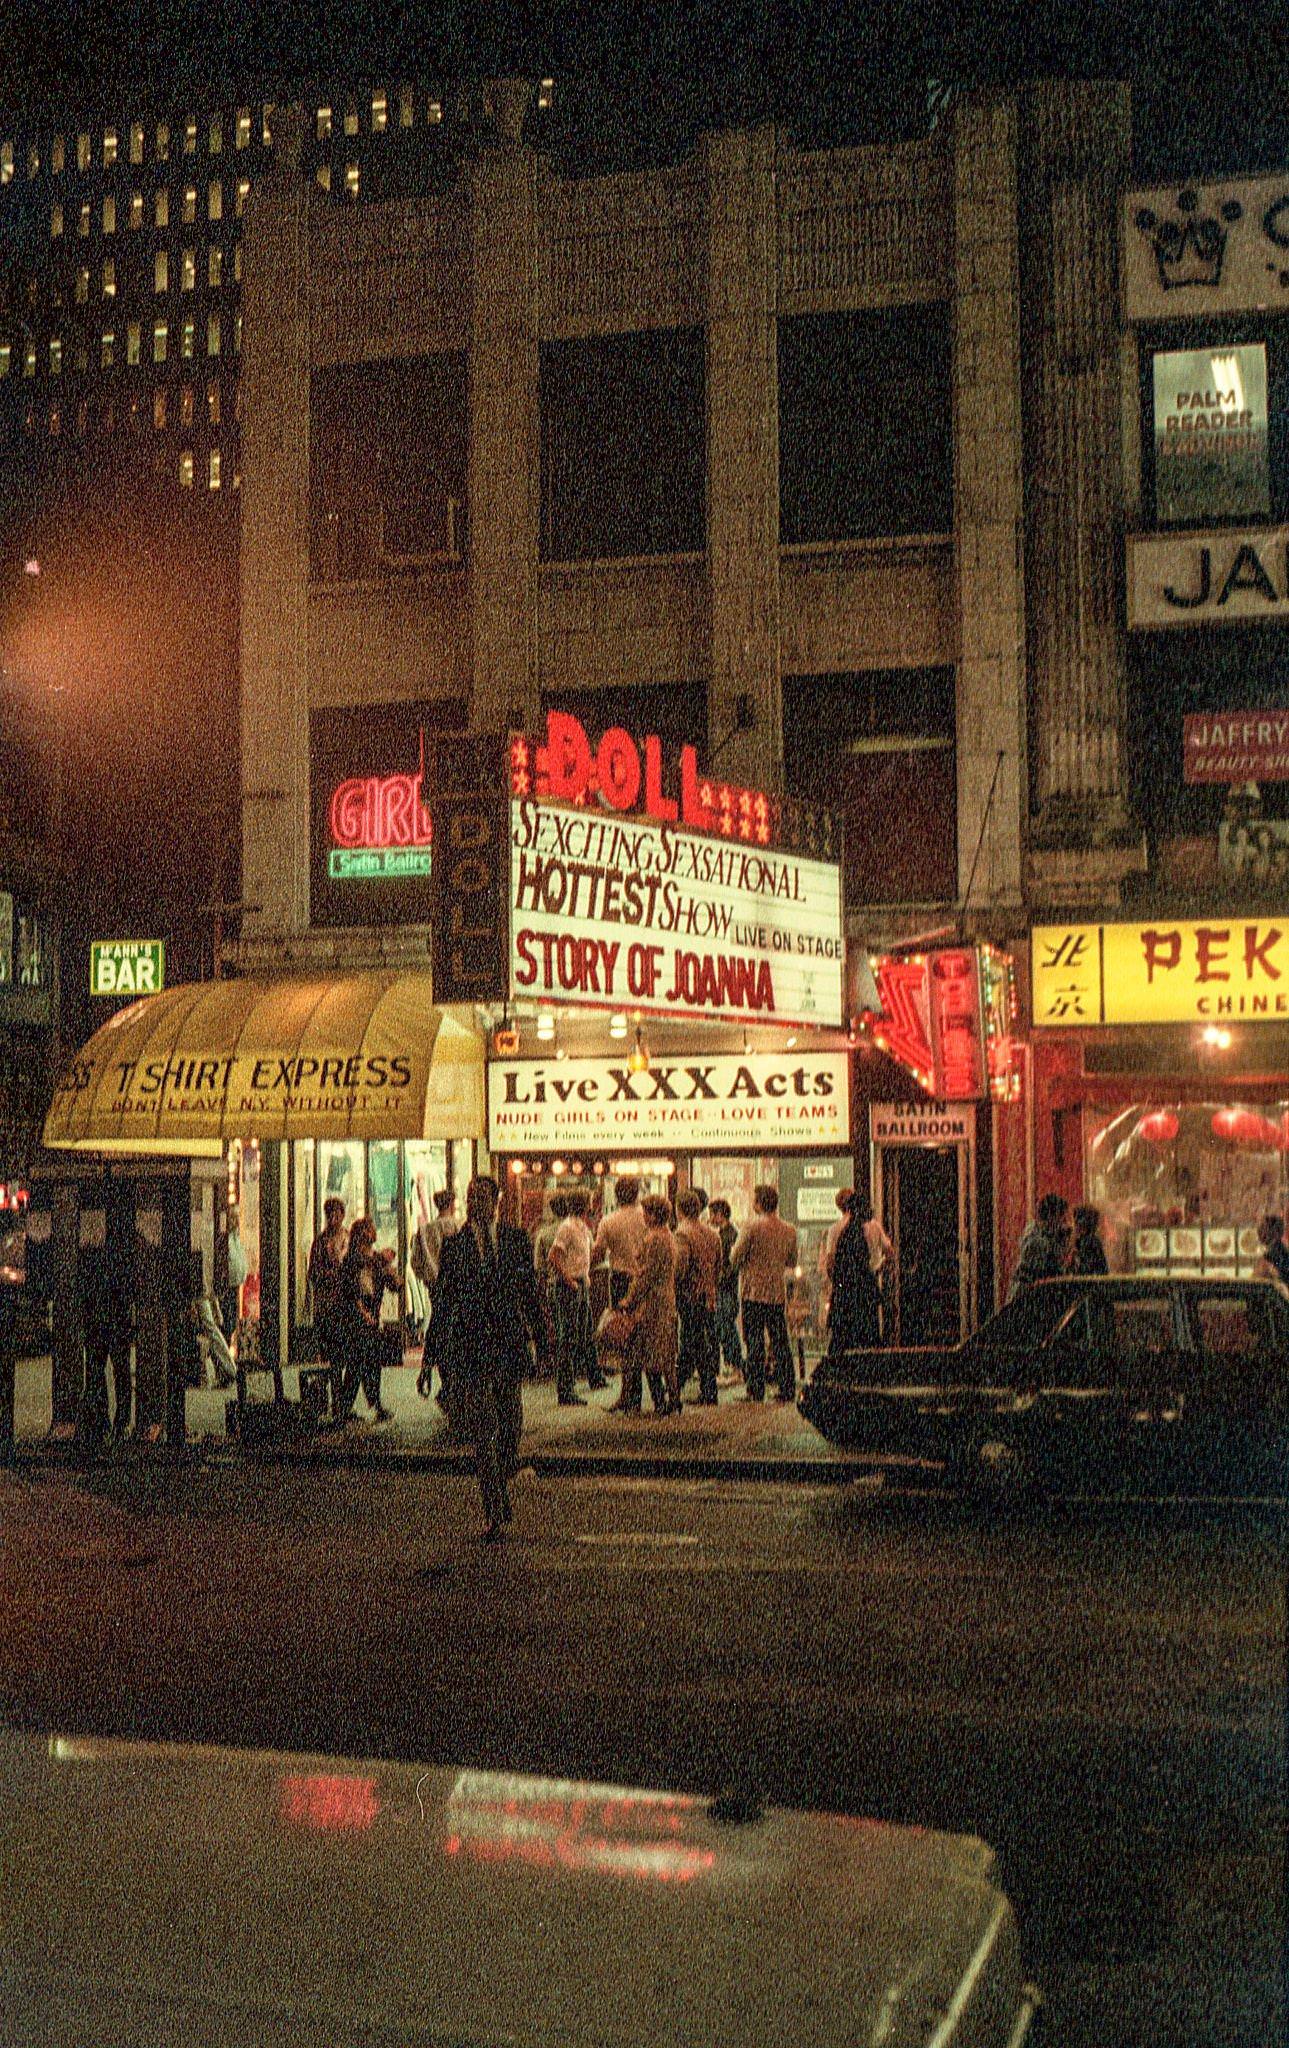 Group Of People Gathered In Front Of The Doll Theatre In Times Square, Manhattan, 1984.